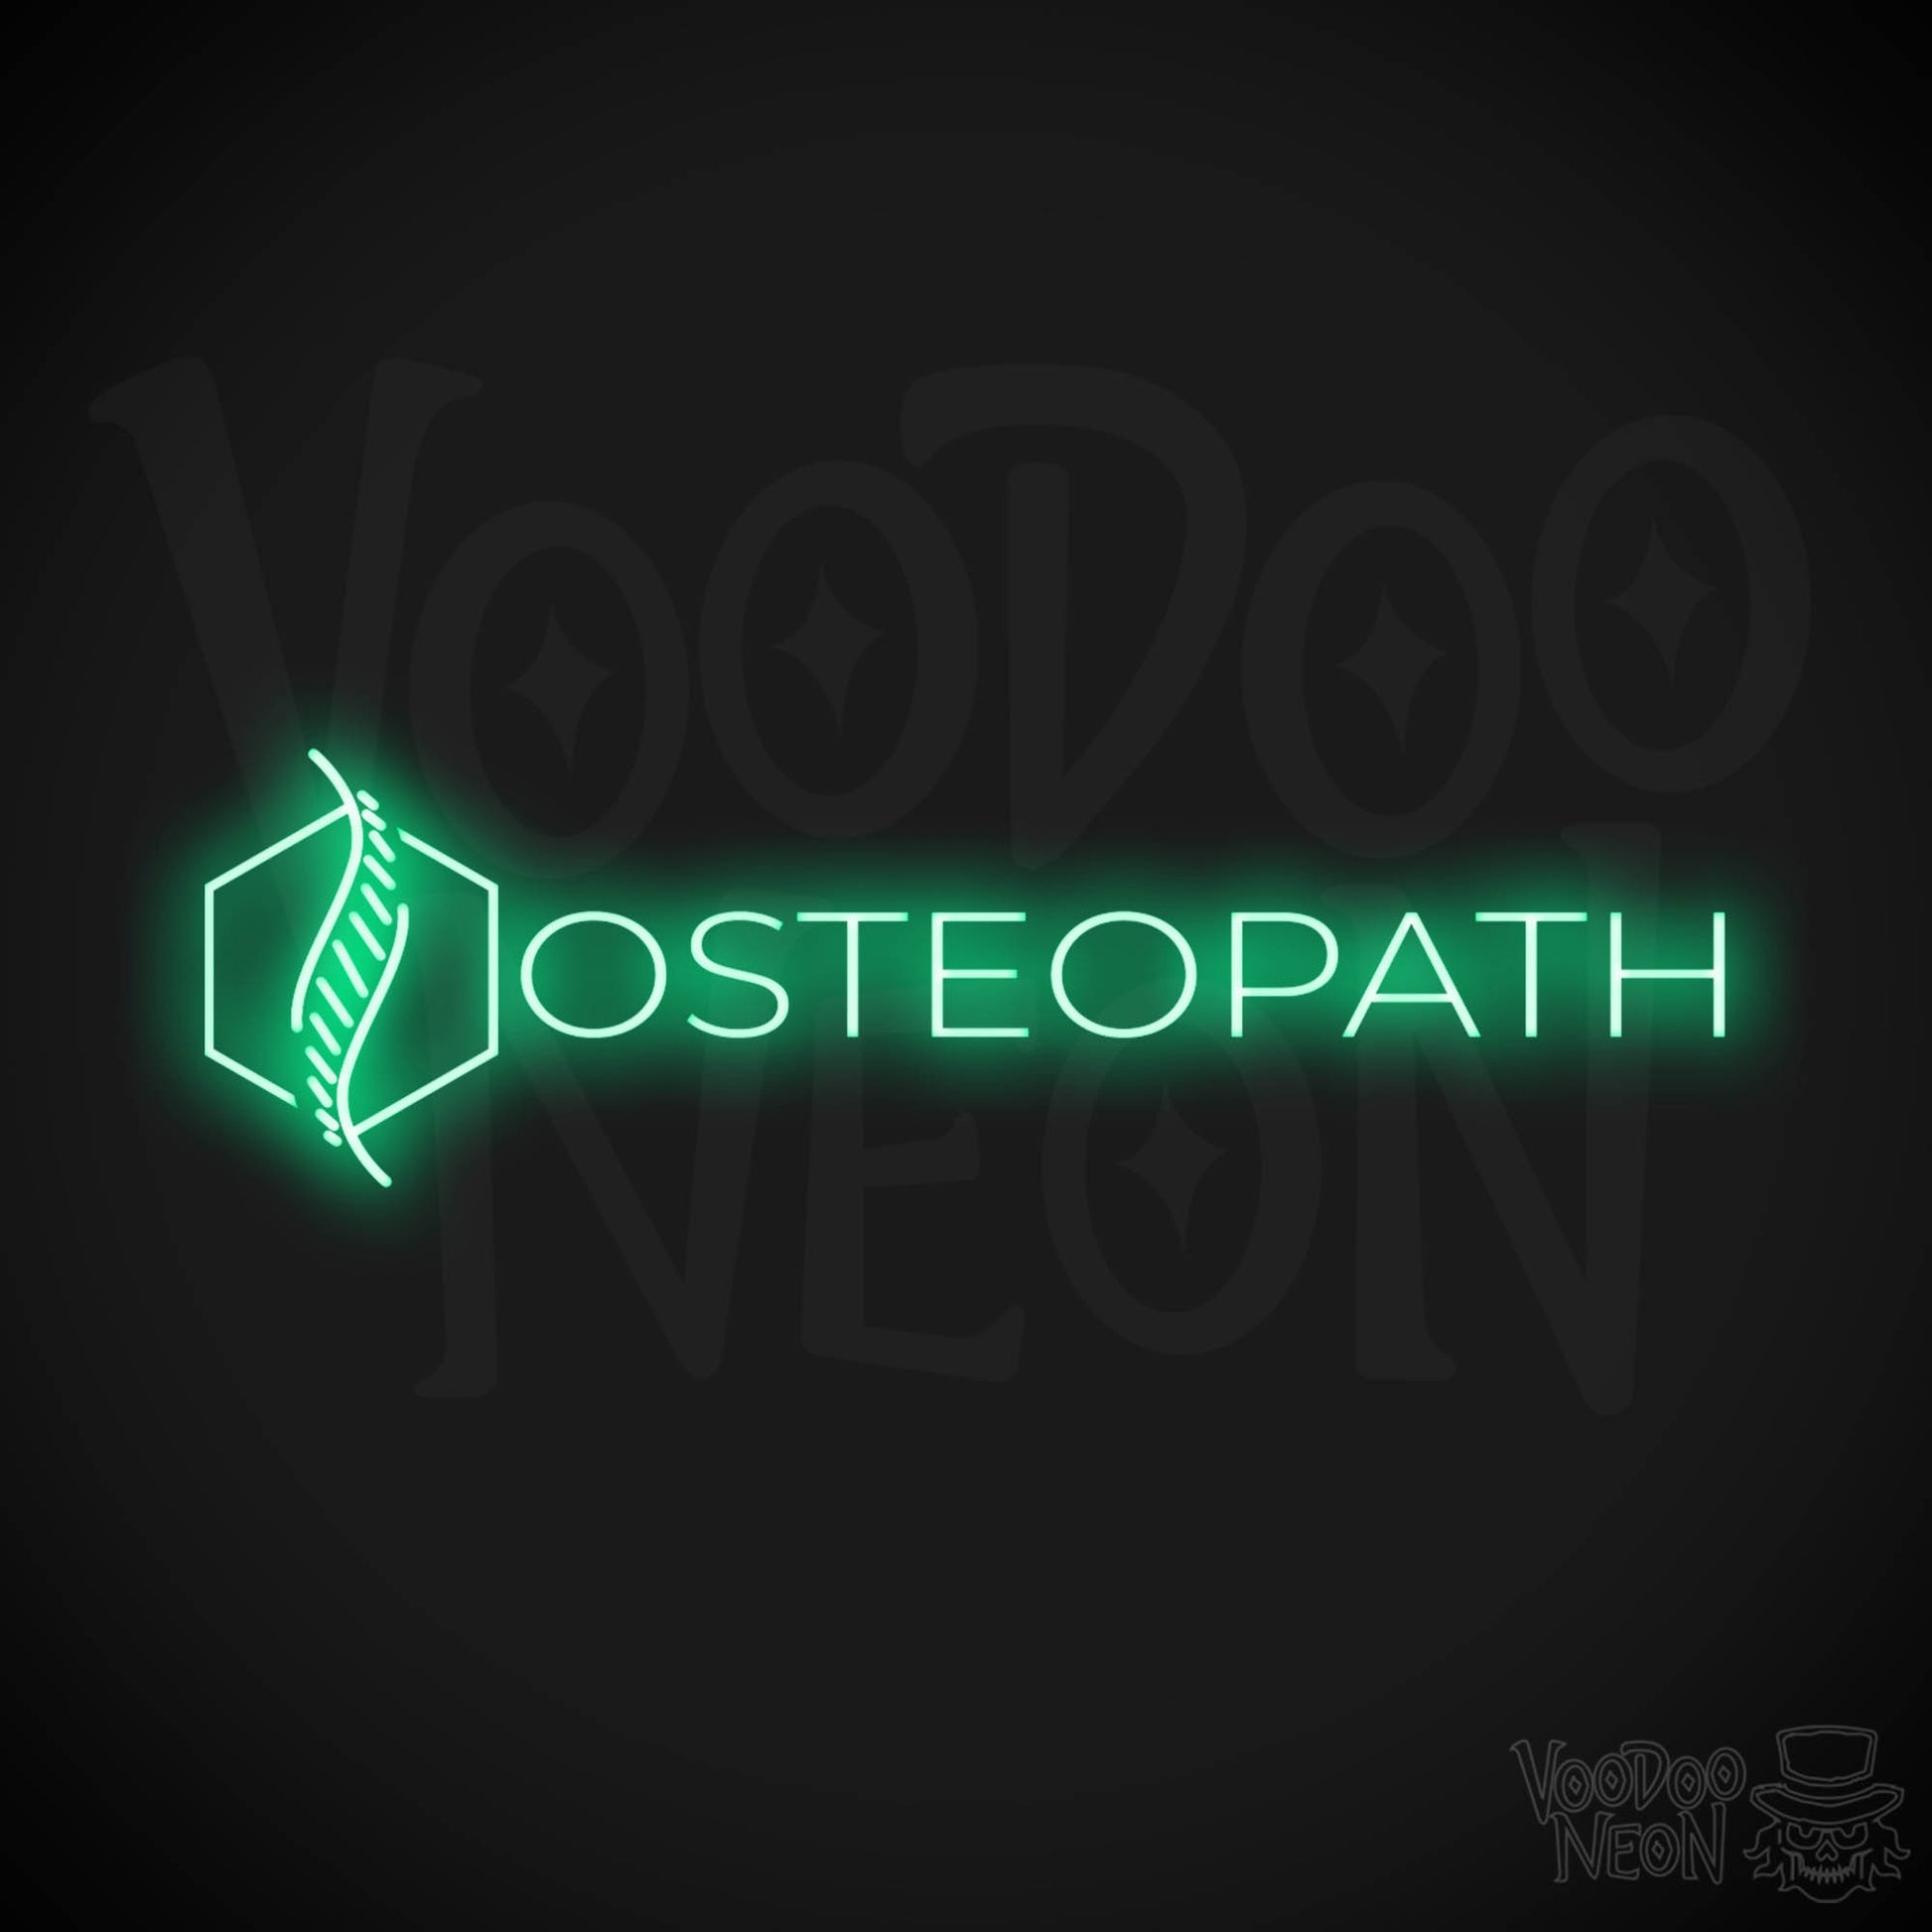 Osteopath LED Neon - Green